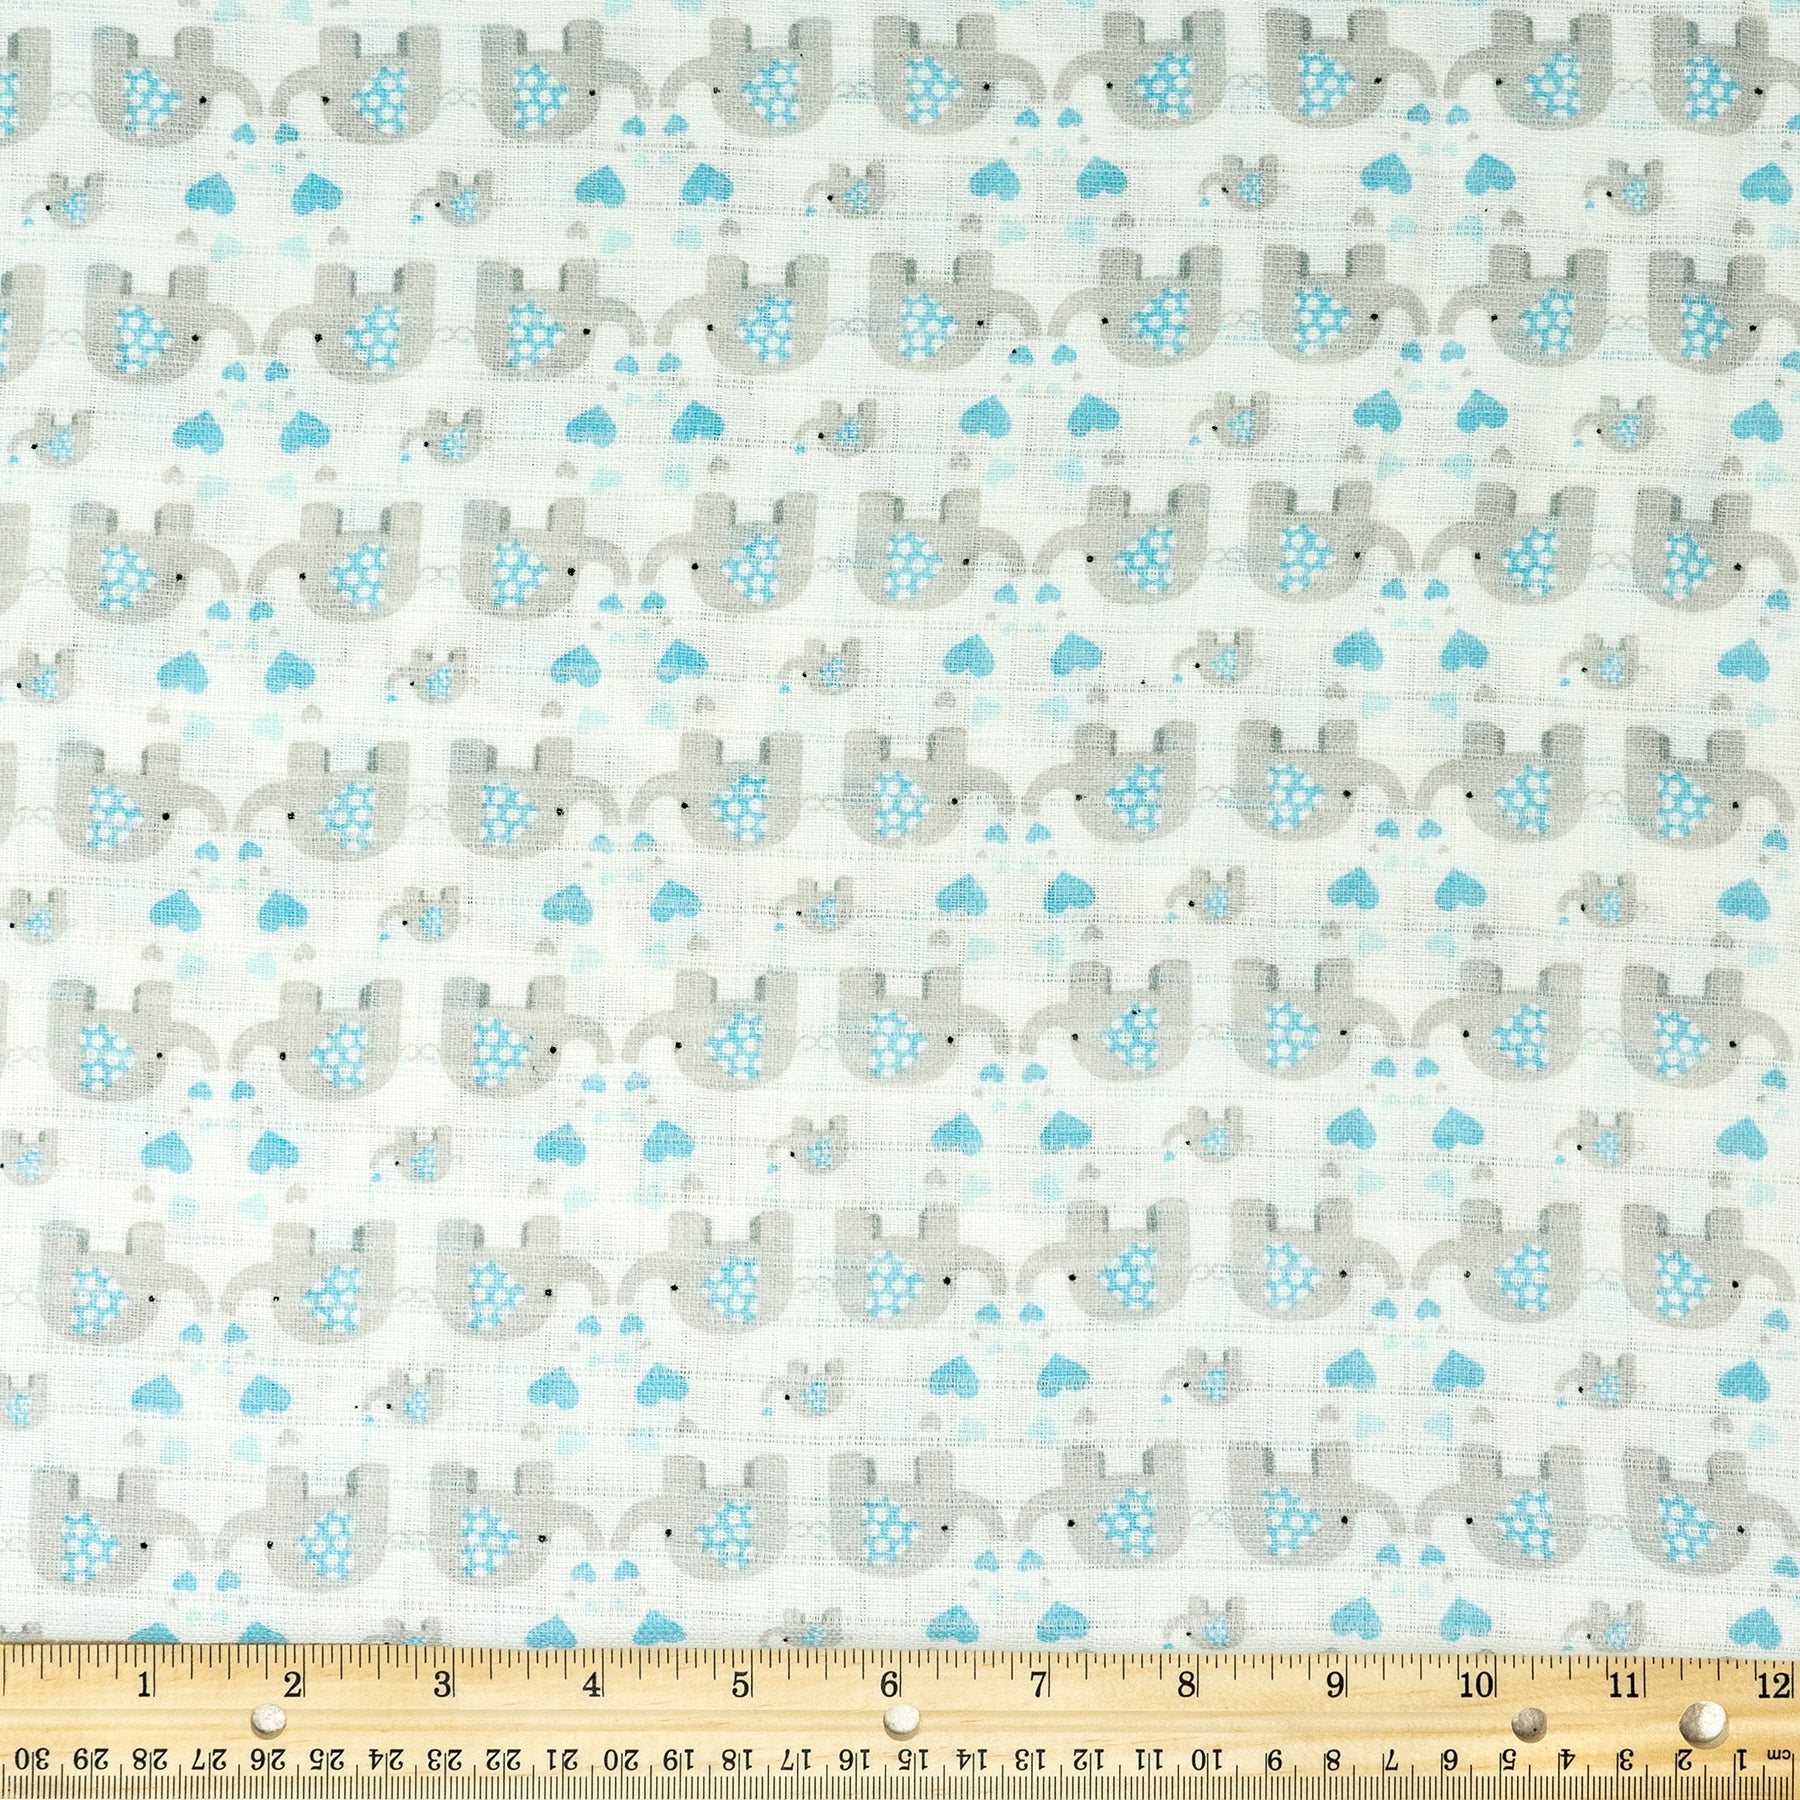 Waverly Inspirations 100% Cotton Muslin 42" Nursery Print Sewing & Crafting Fabric by the Yard